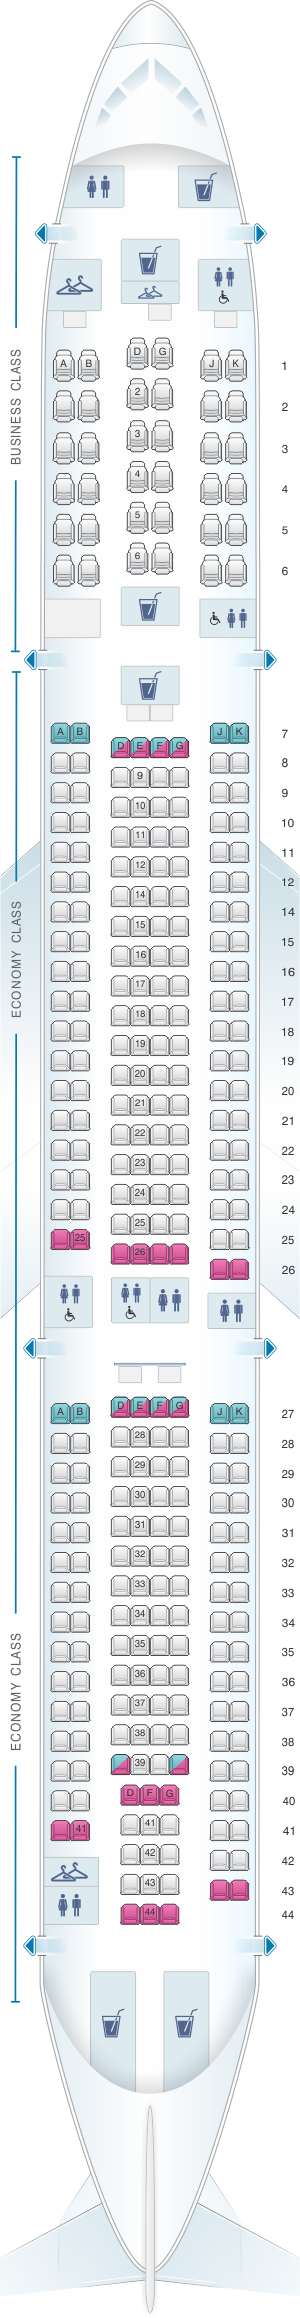 Seat Map China Airlines Airbus A330 300 Config 2